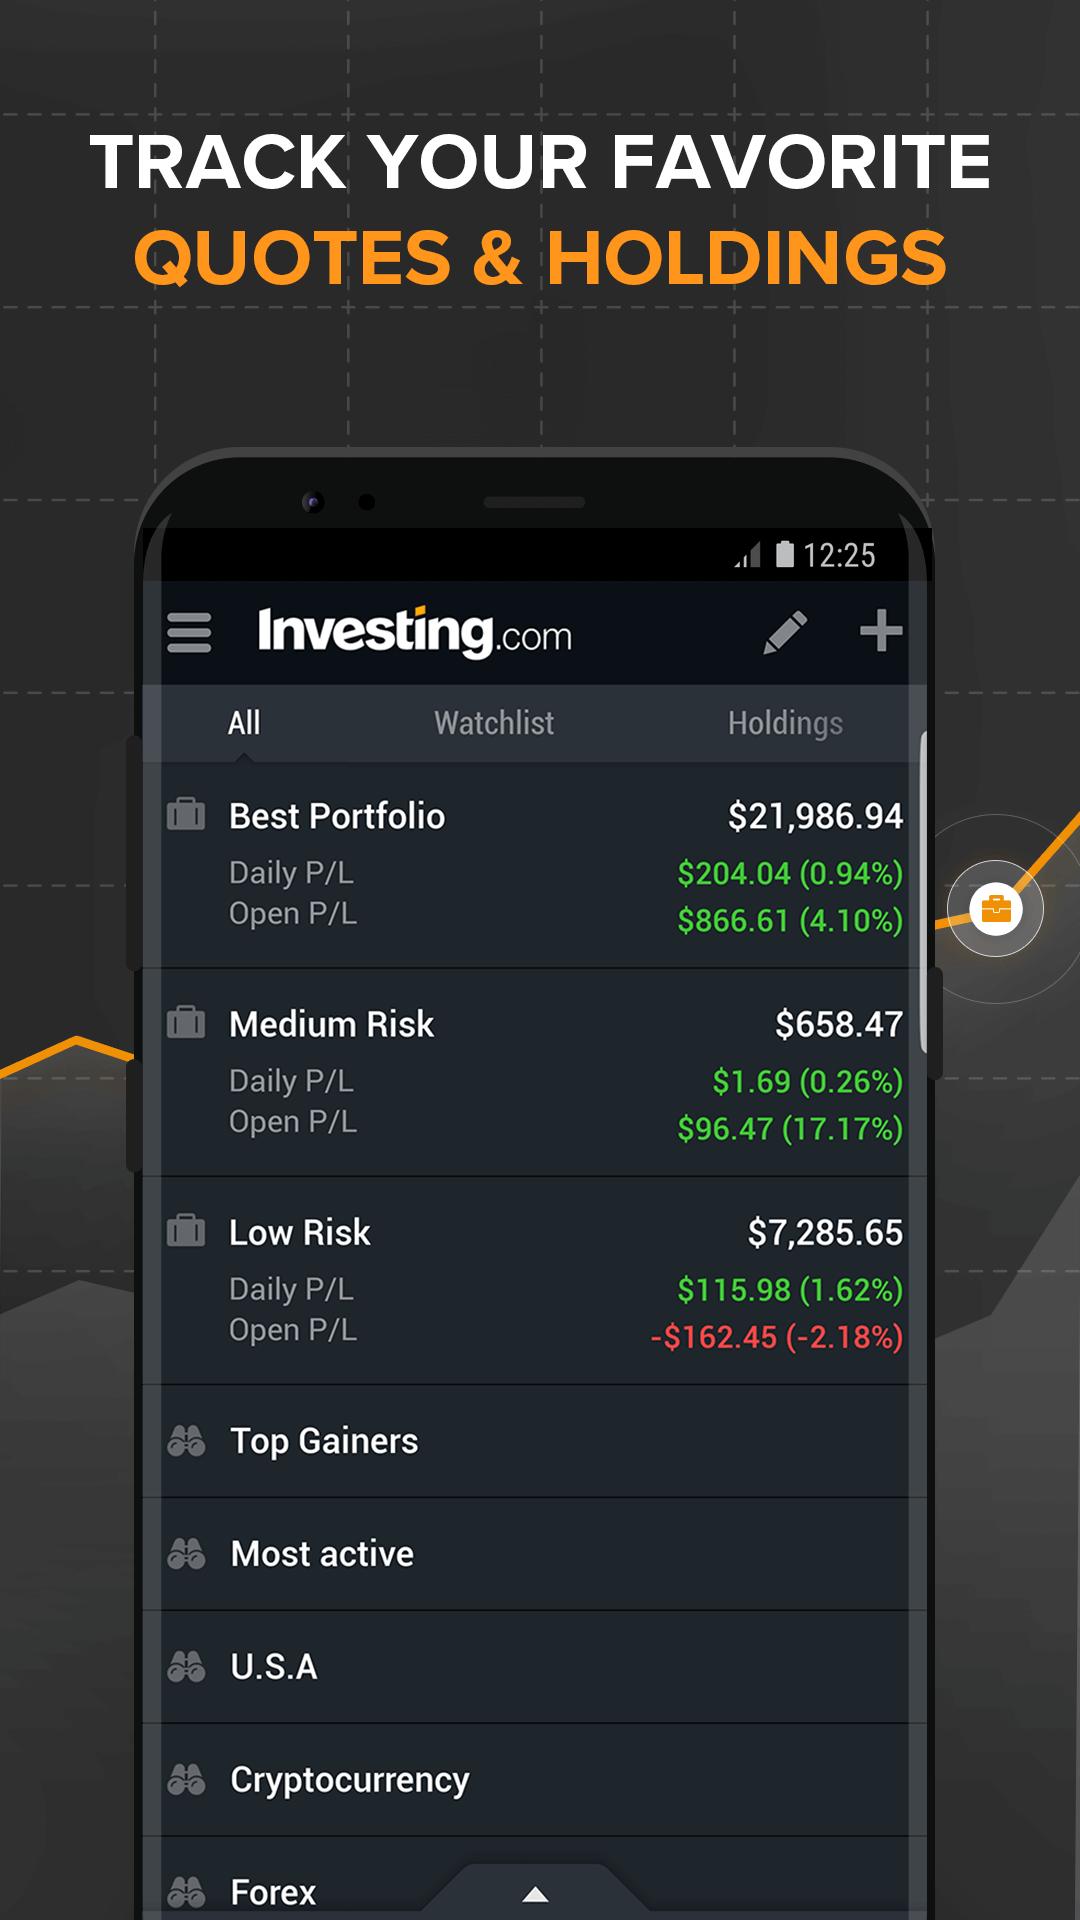 Investing.com: Stocks, Finance, Markets & News for Android - APK Download